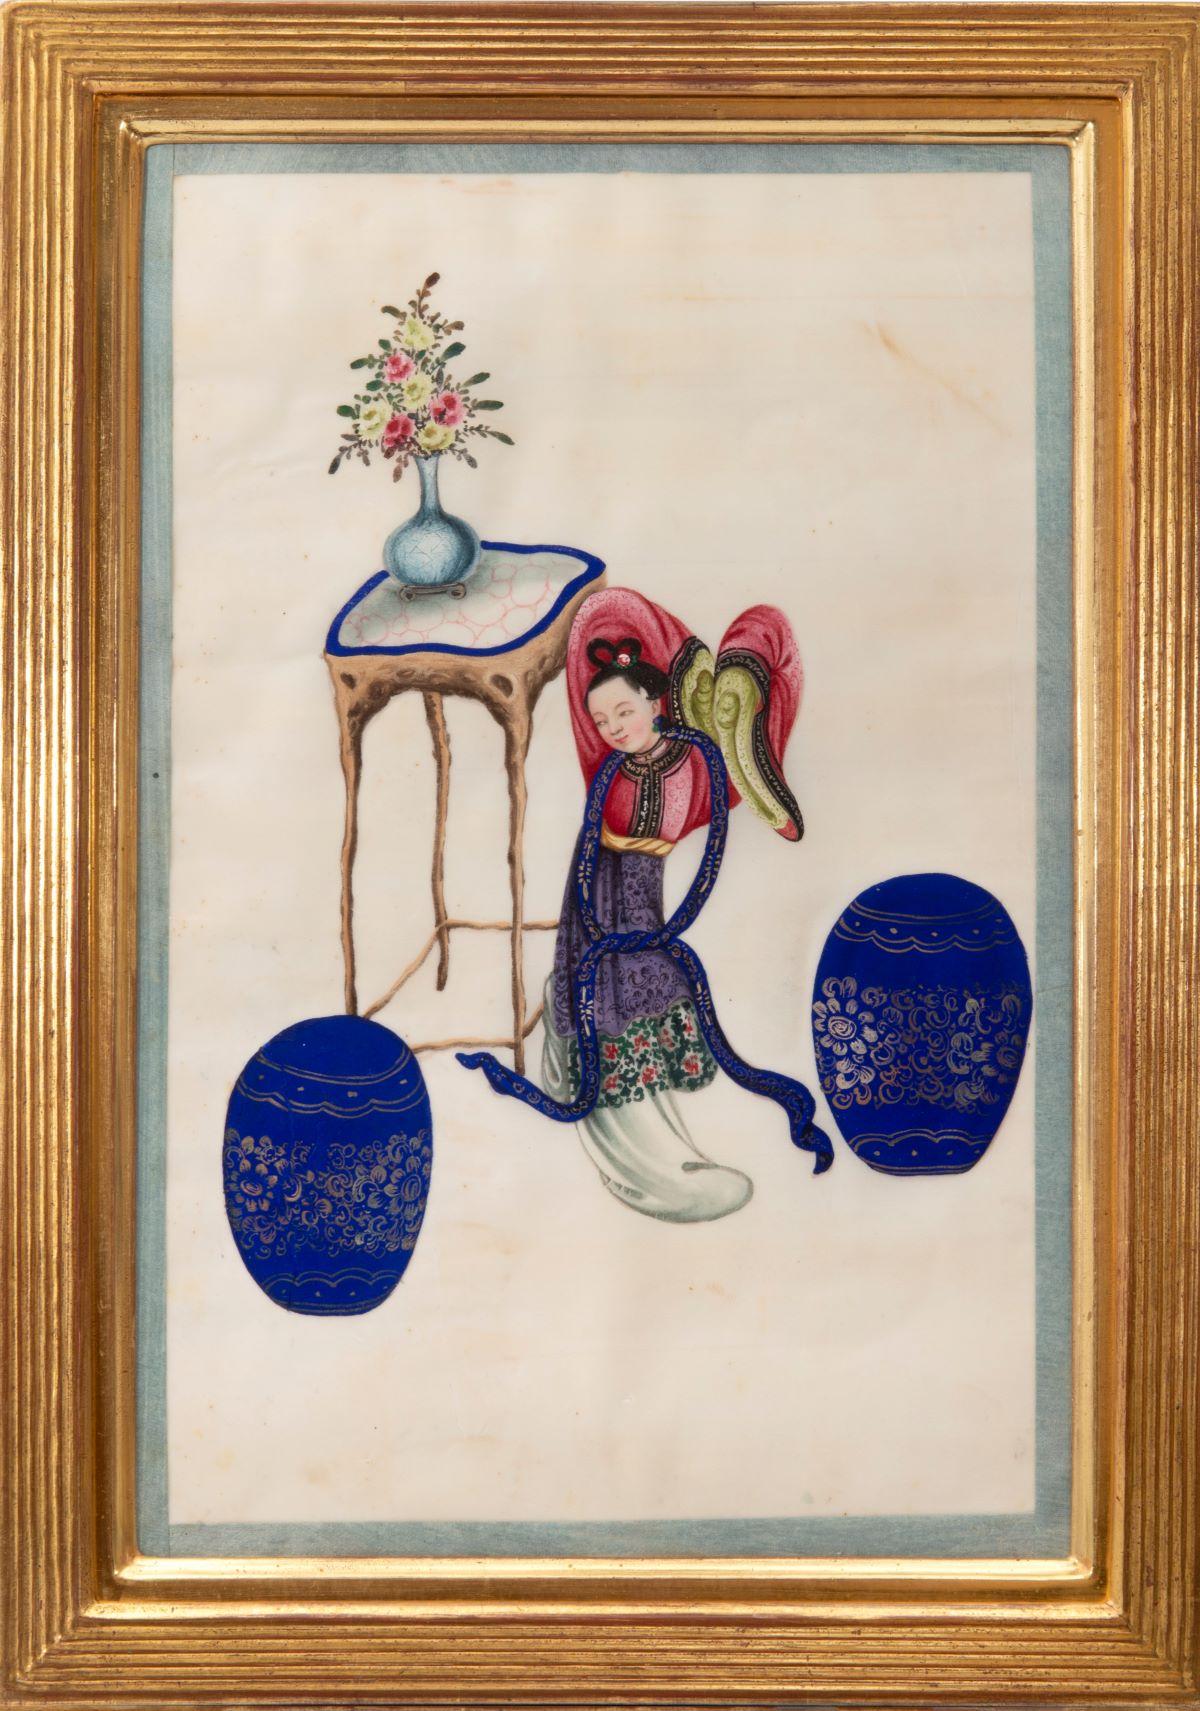 [CHINESE EXPORT WATERCOLOURS ON PITH PAPER].
Group of 12 Courtiers. 
Mid to late nineteenth century.

12 hand painted water-colours on pith paper, pale blue silk borders, a few minor cracks and tears to rice paper as often.  Framed and glazed,